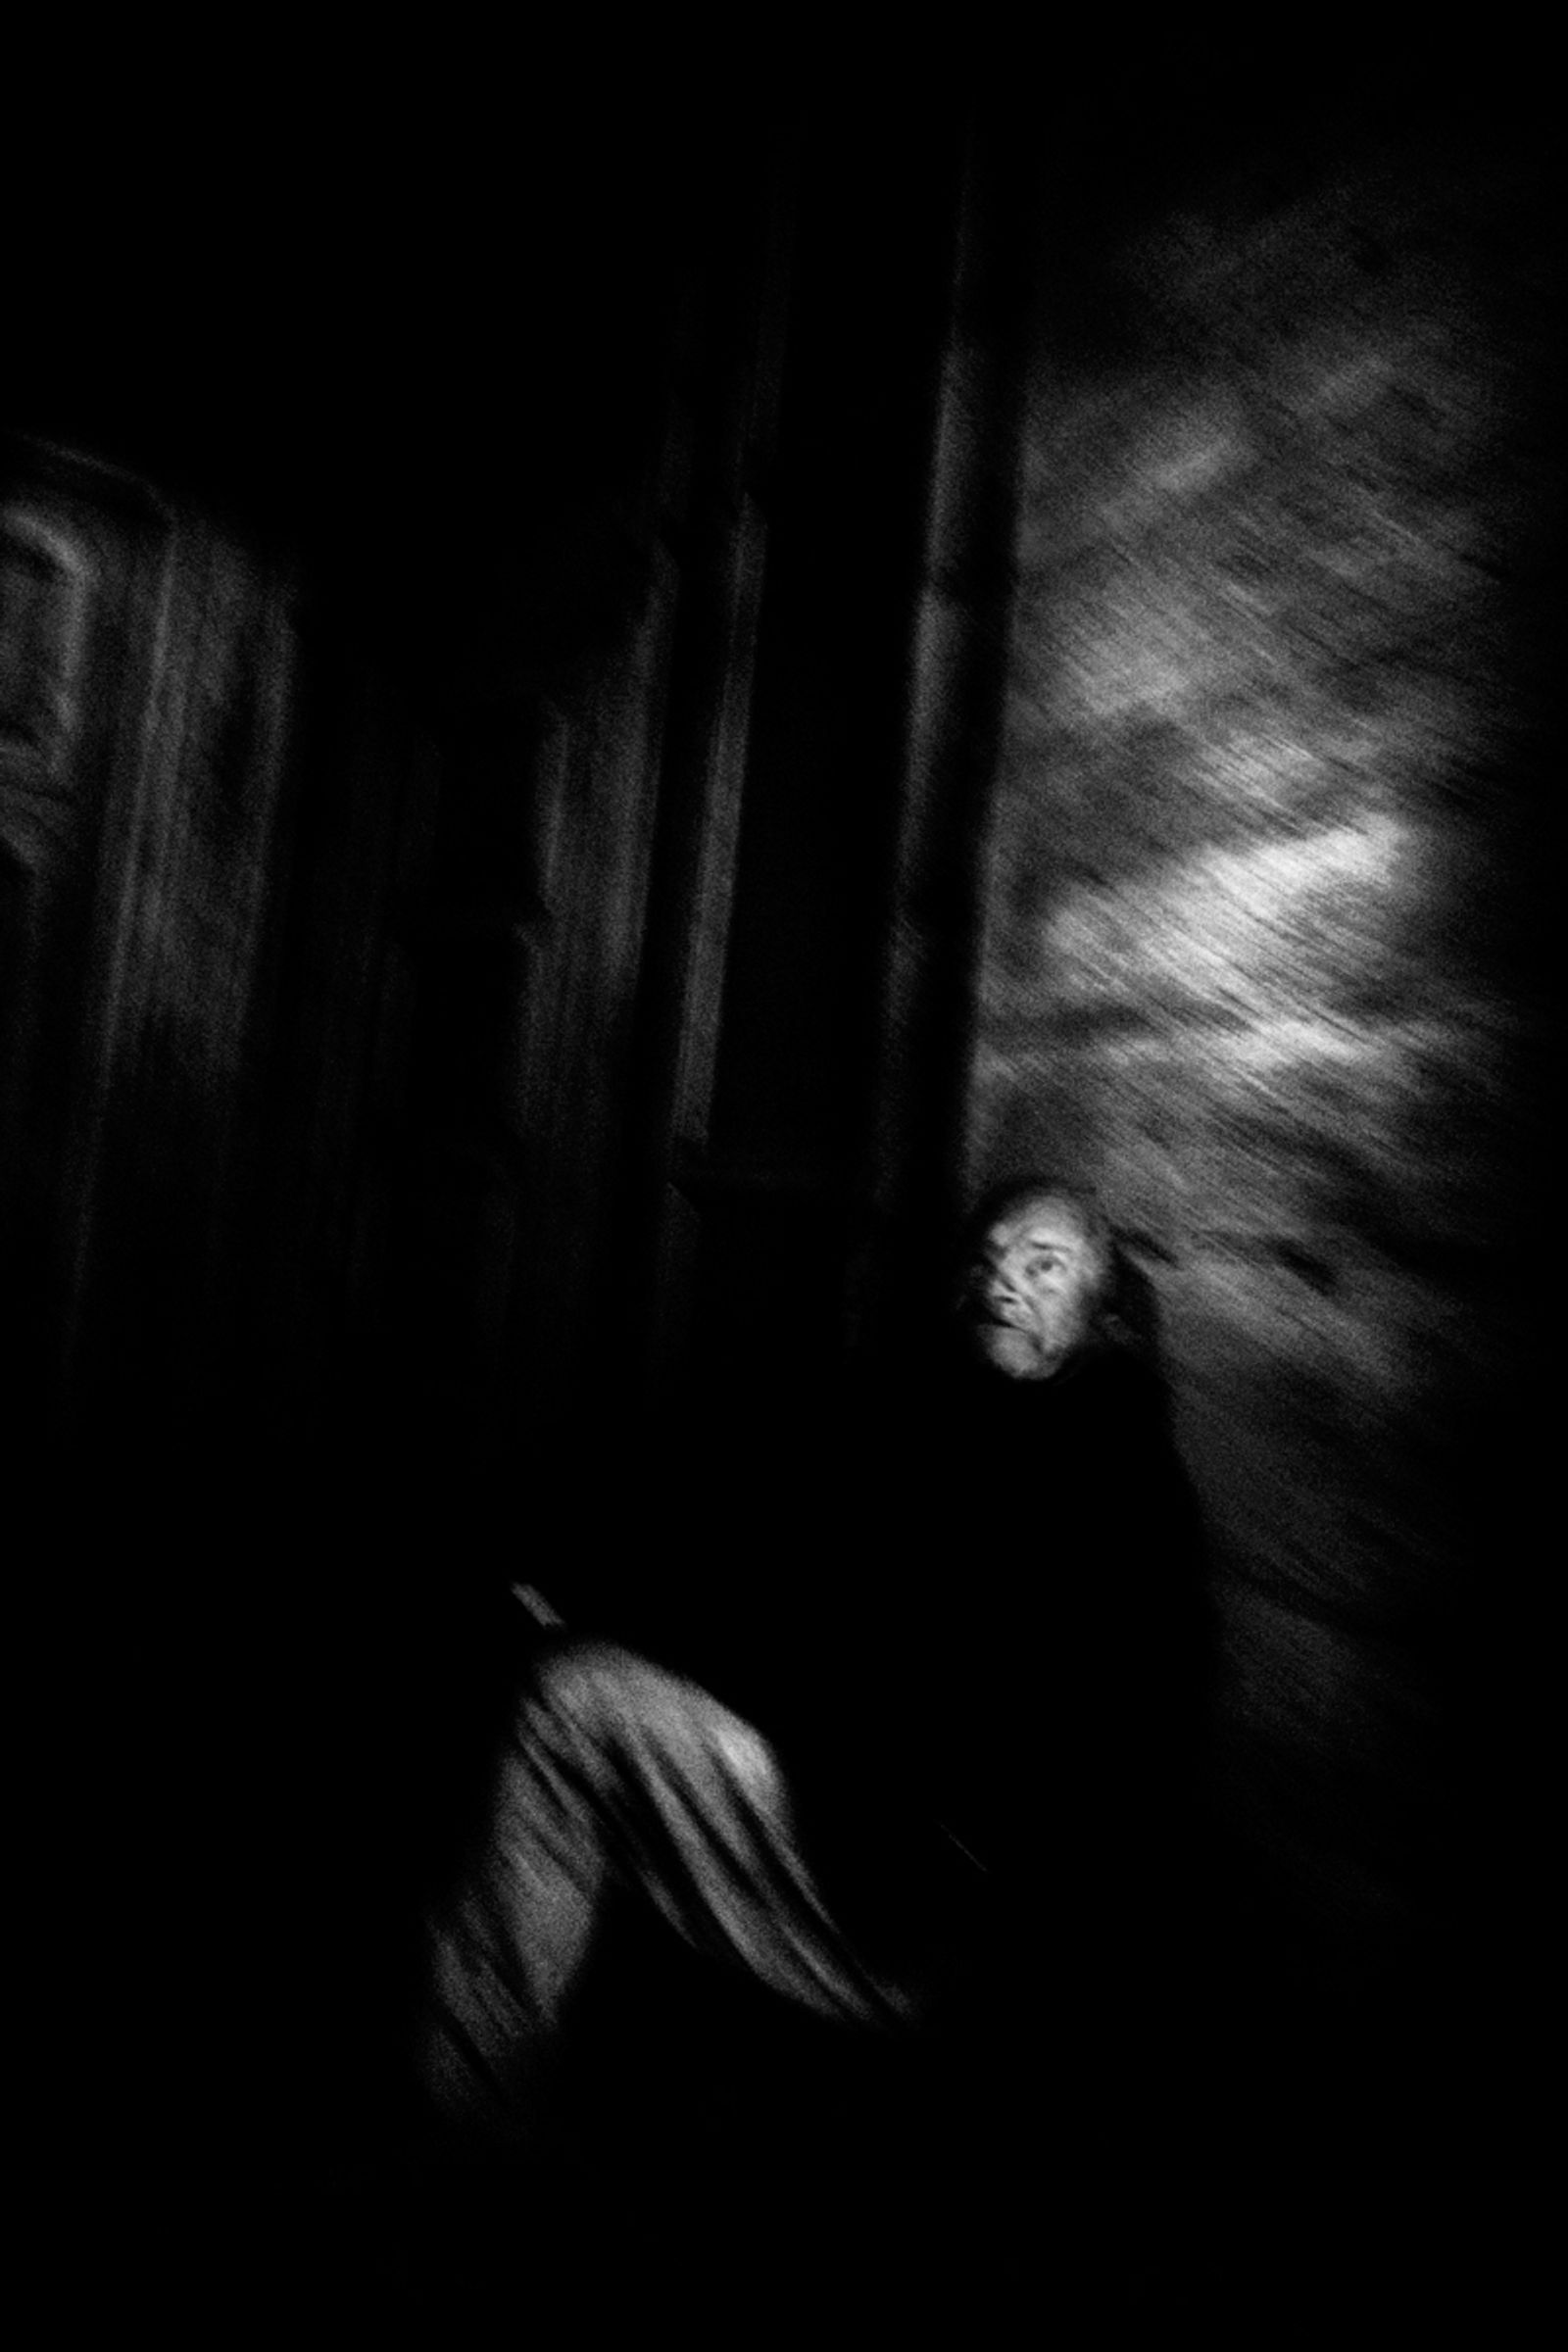 © Nino Cannizzaro - Image from the HUM photography project